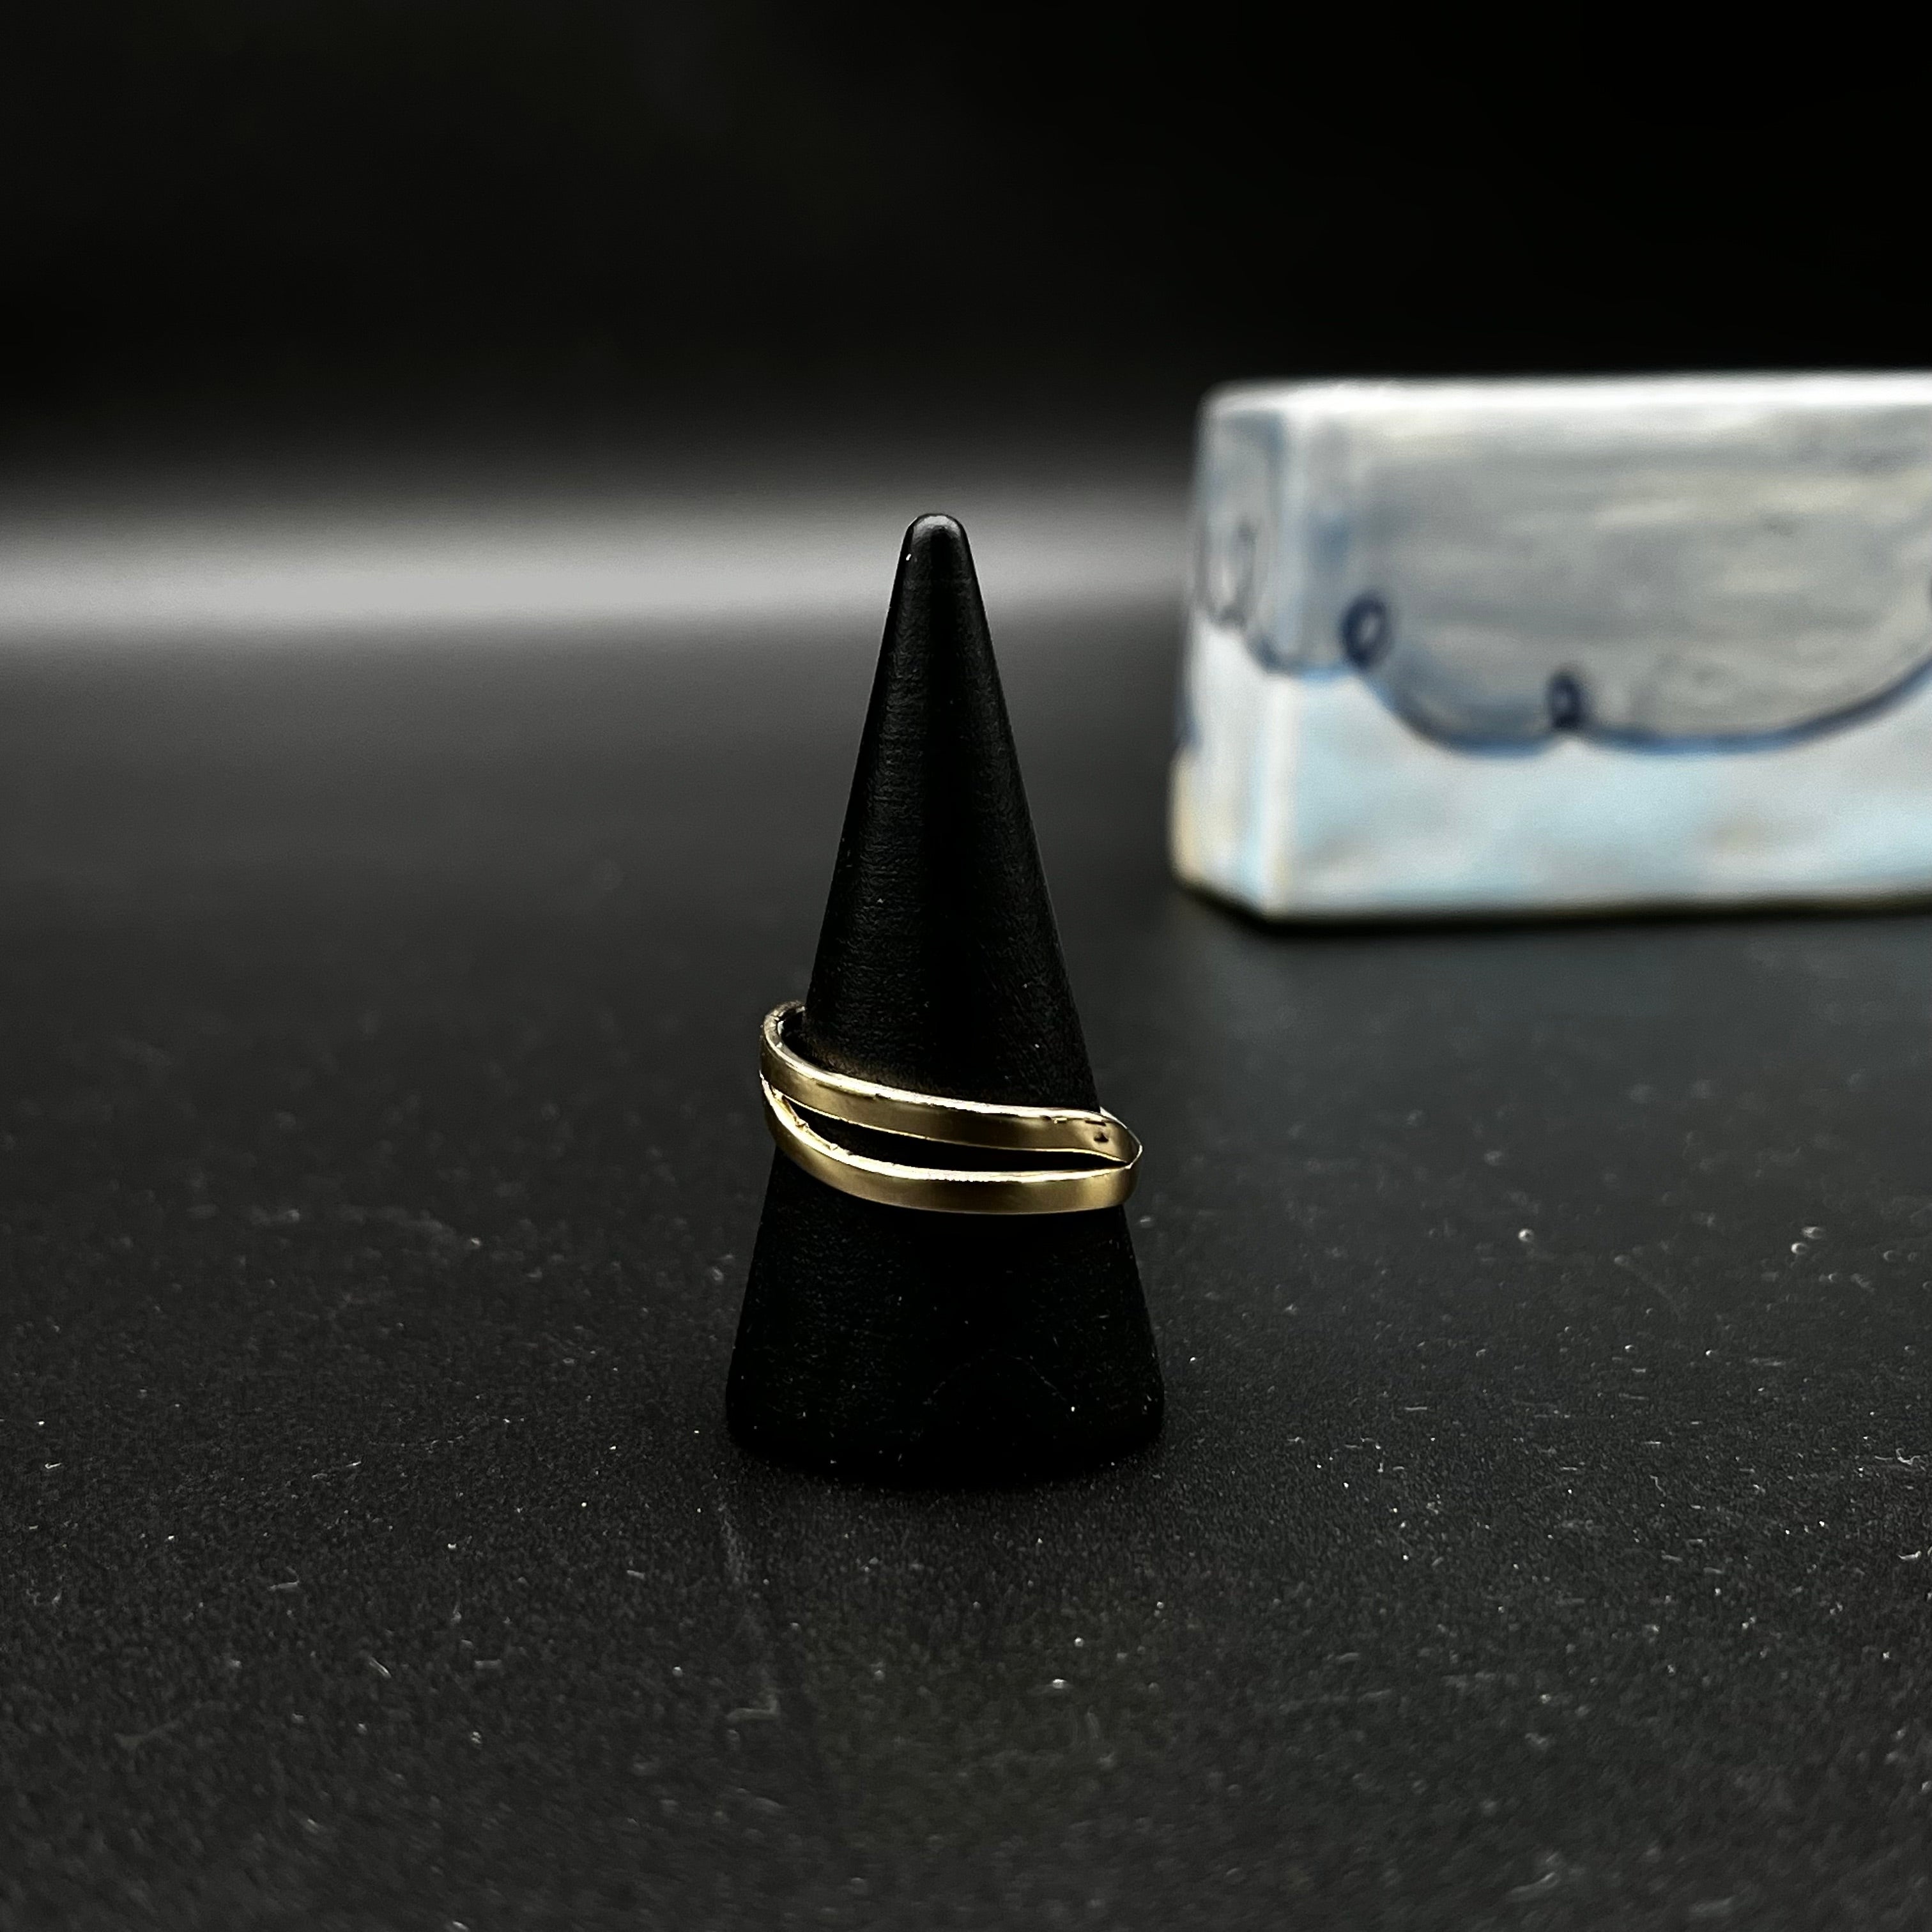 9ct yellow gold ring. Double twist, flat wire, polished finish.